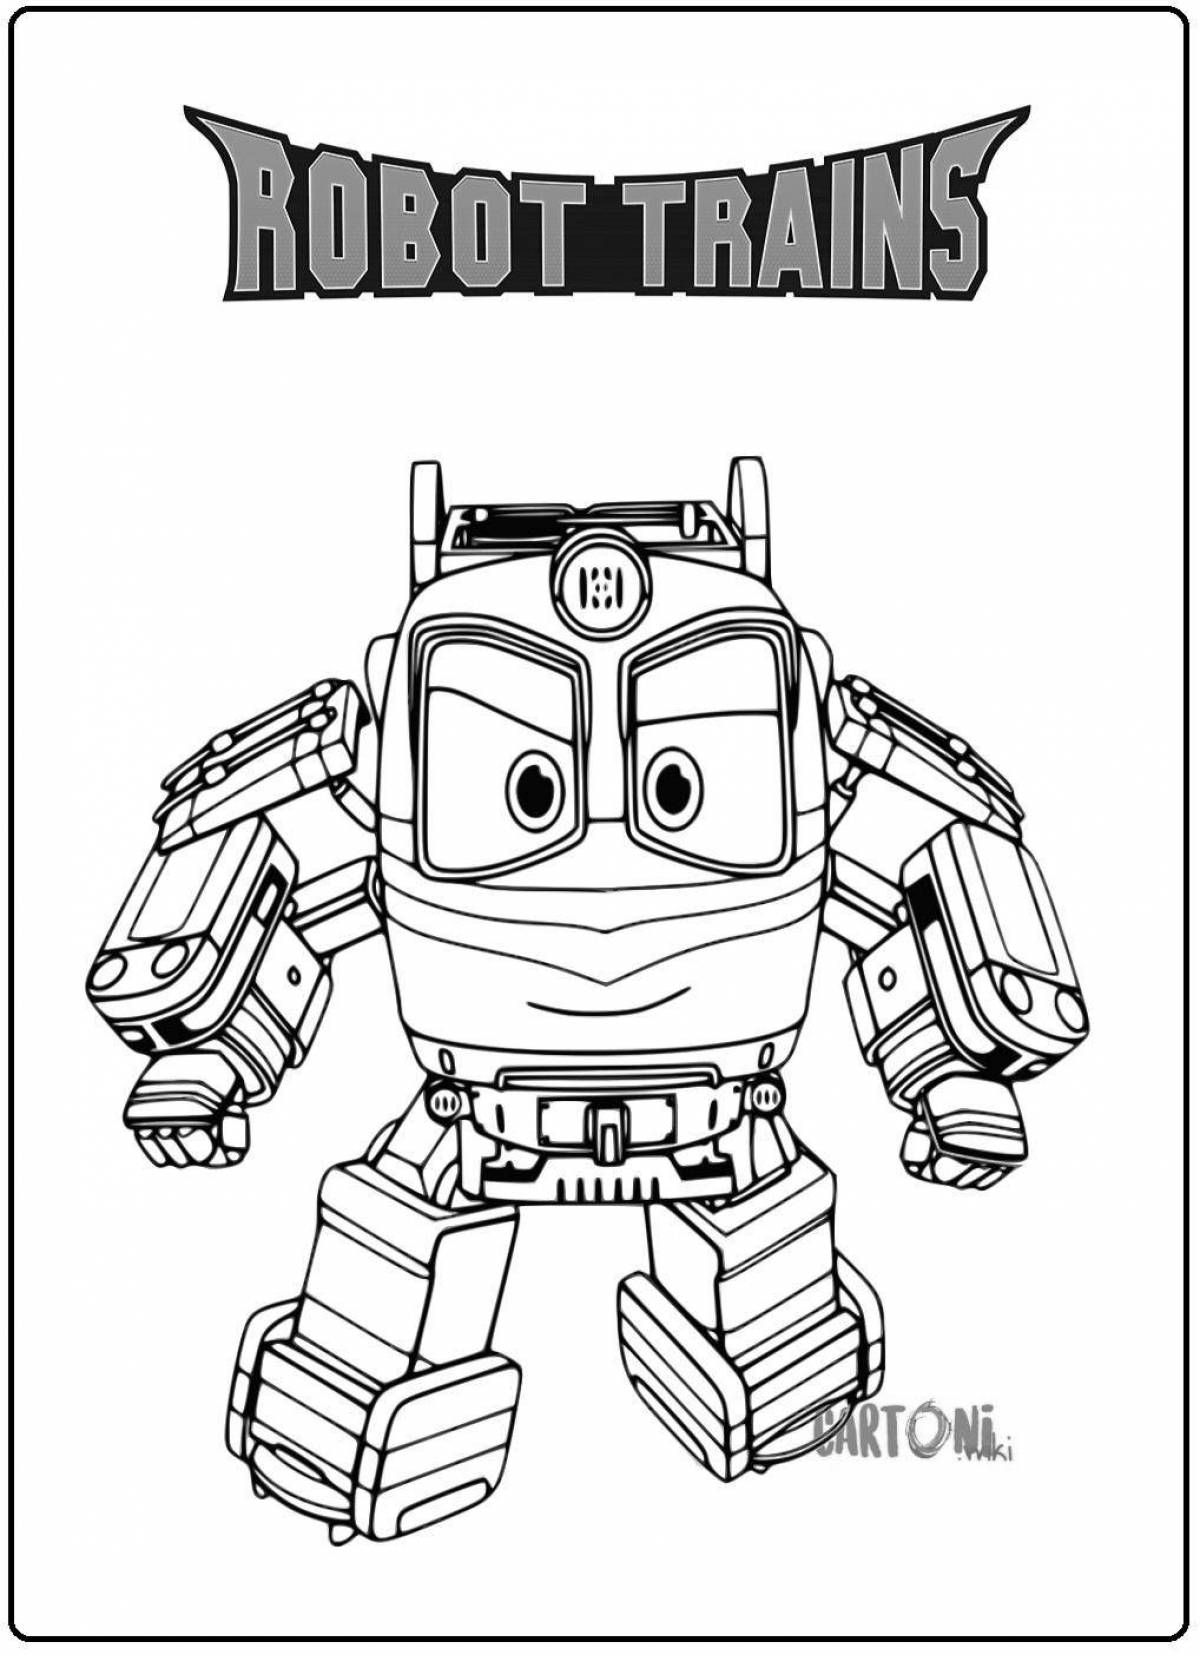 Victor's Amazing Robot Train Coloring Page